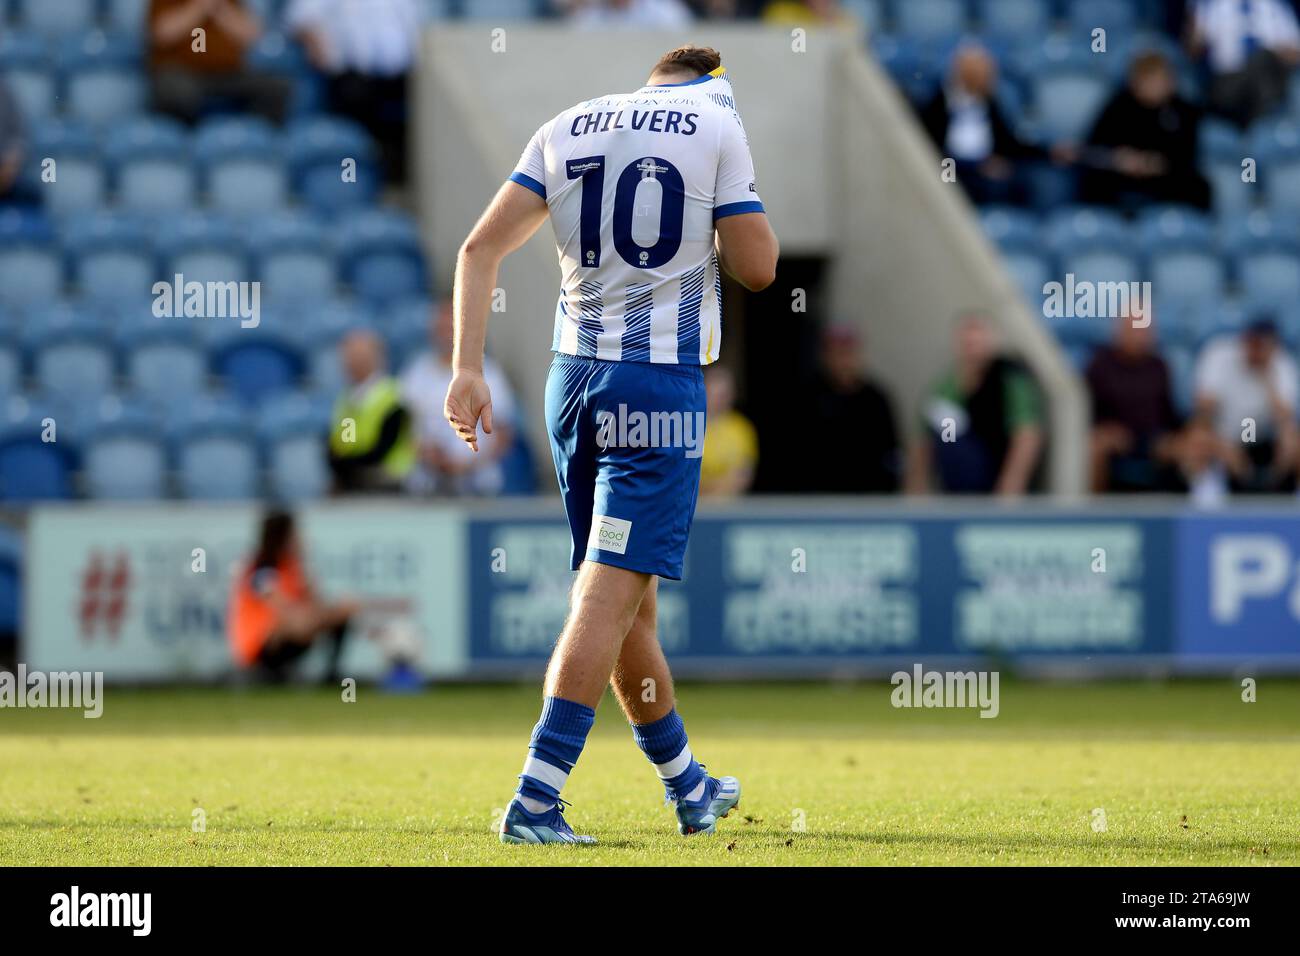 Noah Chilvers of Colchester United misses from the penalty spot - Colchester United v Morecambe, Sky Bet League Two, JobServe Community Stadium, Colchester, UK - 7th October 2023 Editorial Use Only - DataCo restrictions apply Stock Photo